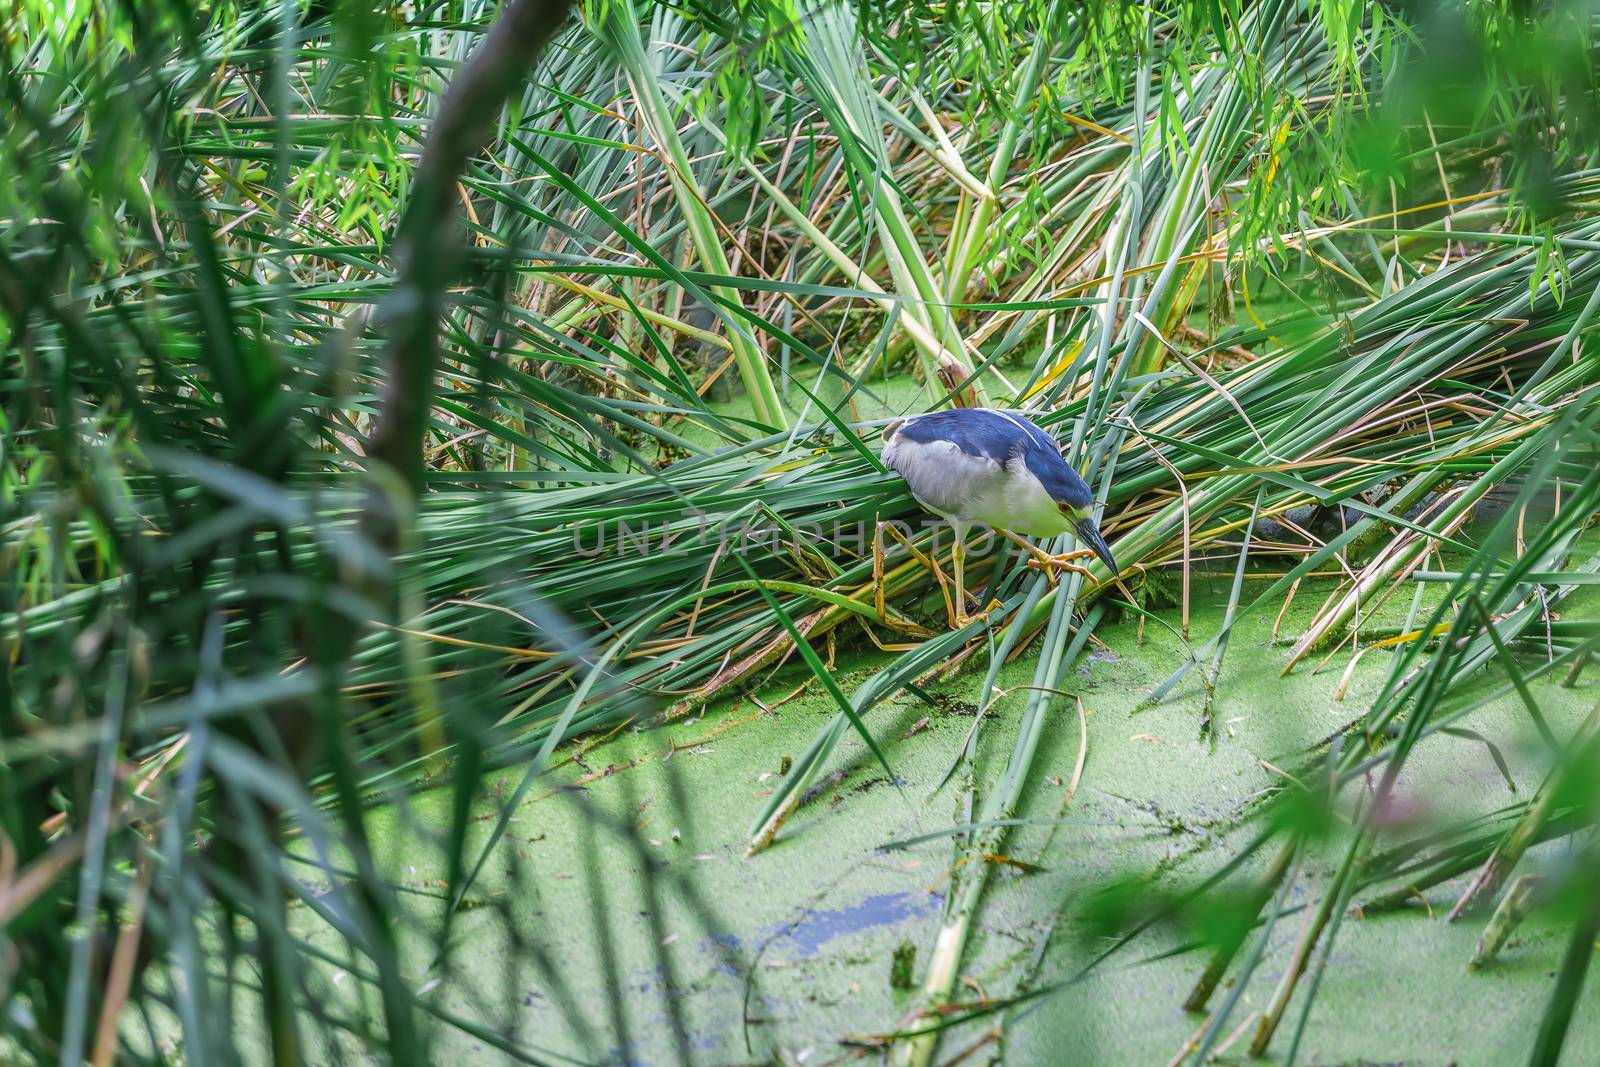 A really beautfiul amazing blue and white bird in the wild, Ontairo, Canada.